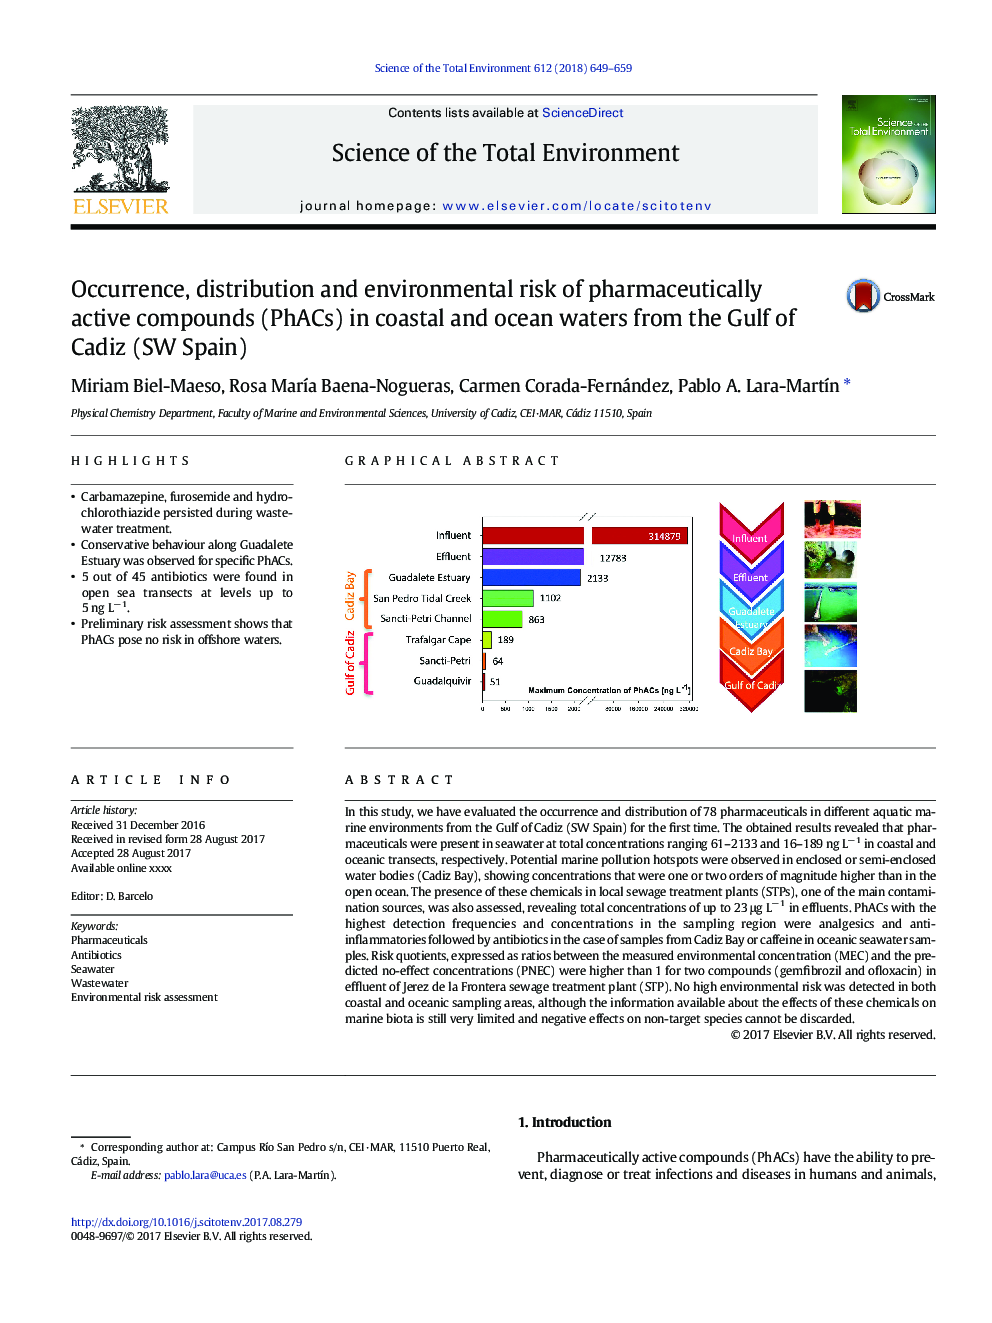 Occurrence, distribution and environmental risk of pharmaceutically active compounds (PhACs) in coastal and ocean waters from the Gulf of Cadiz (SW Spain)